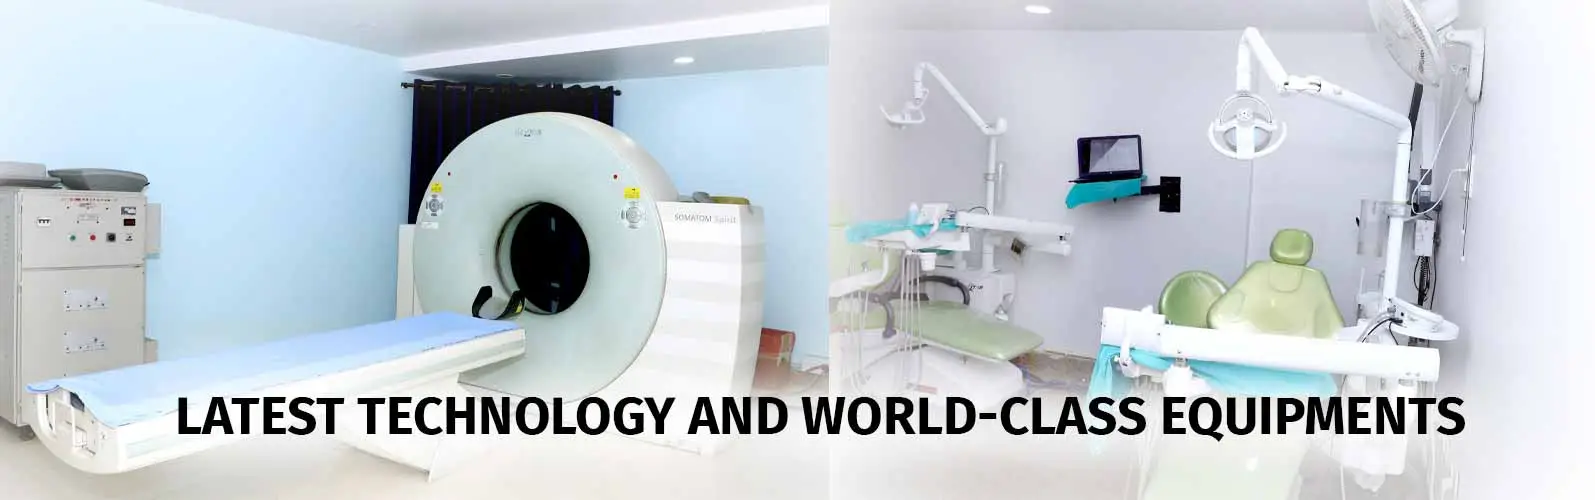 MRI Facility and Maternity Ward Picture in MRRM Hospital